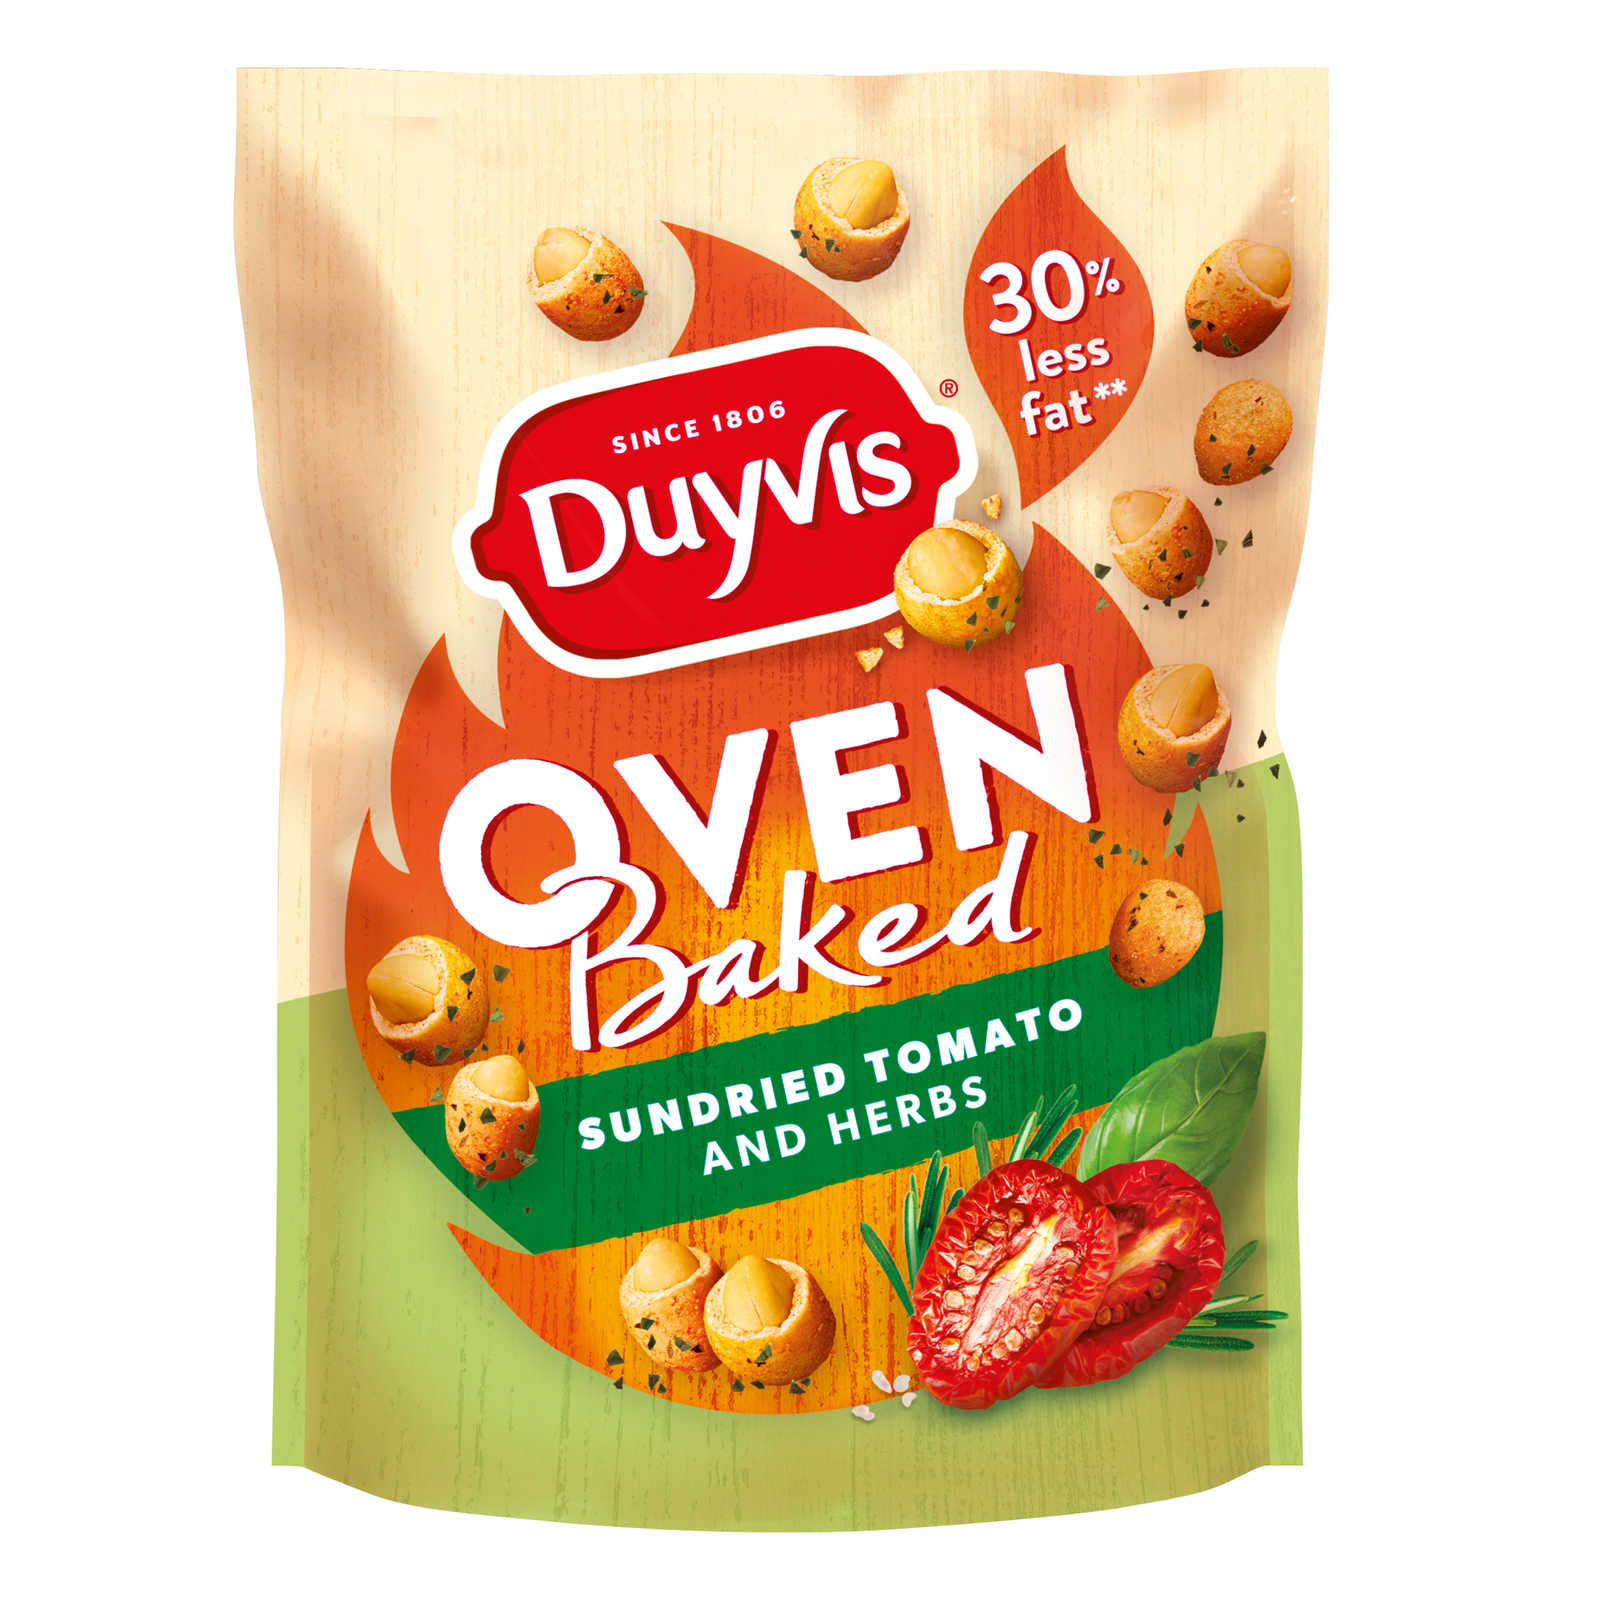 Duyvis-Oven Baked